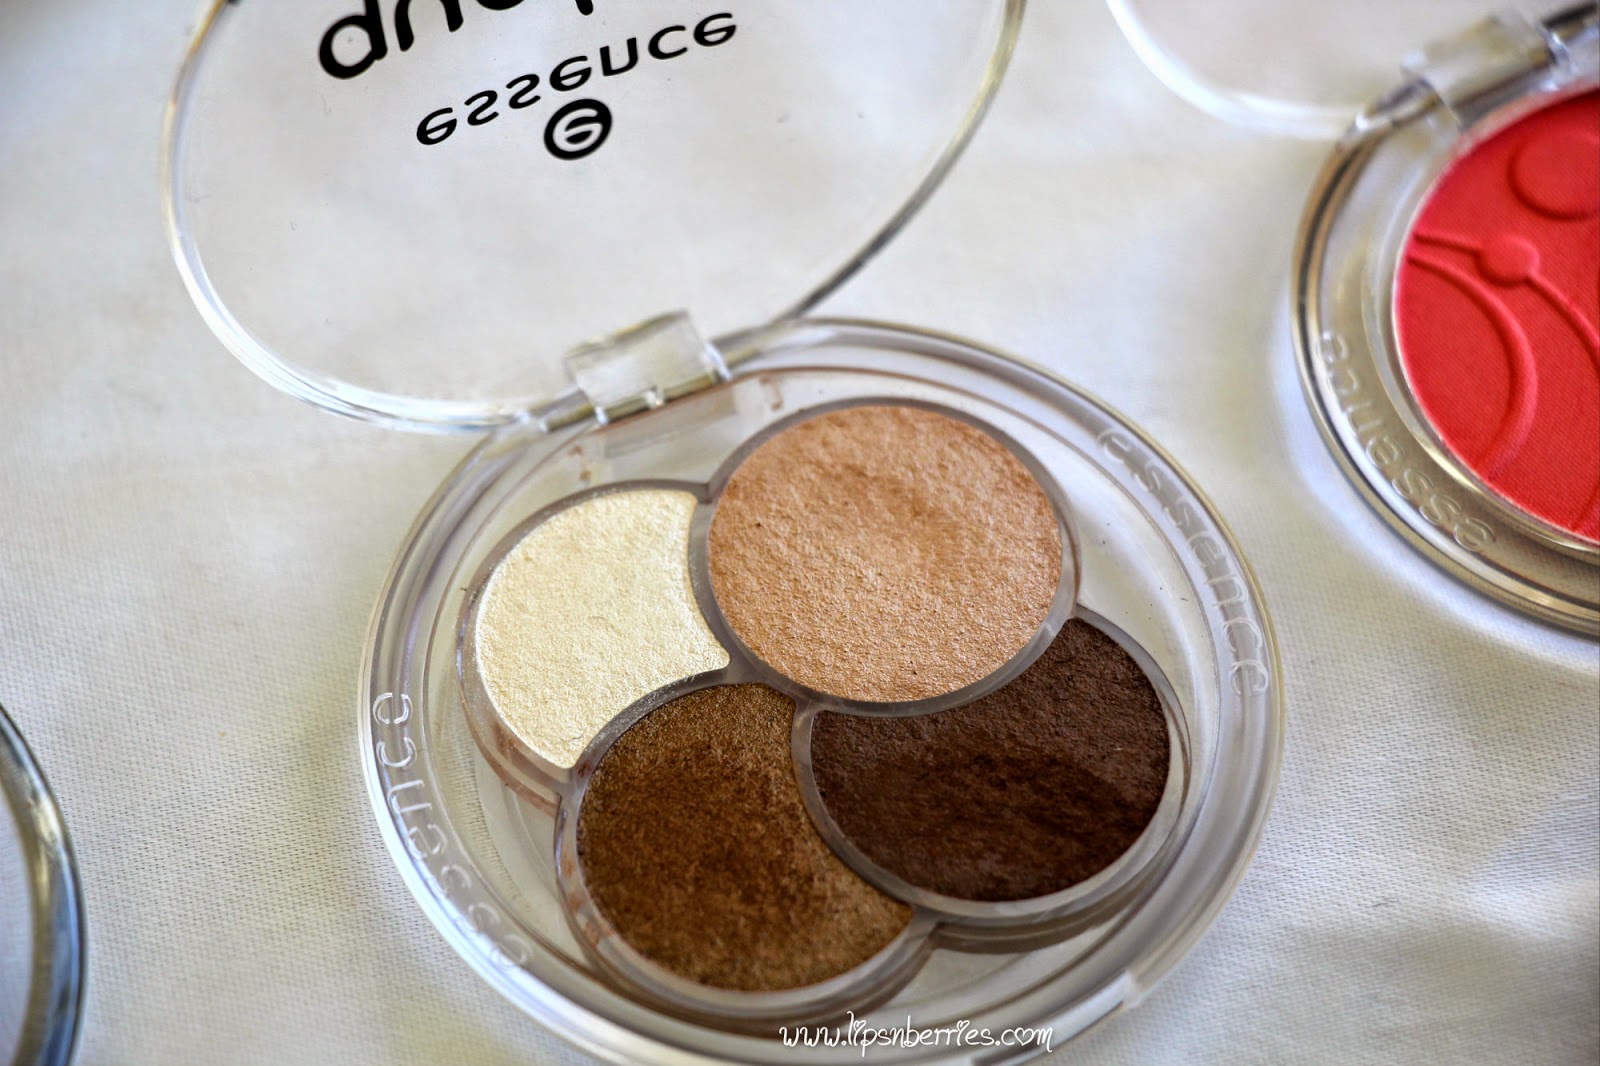 Essence quattro to die for review